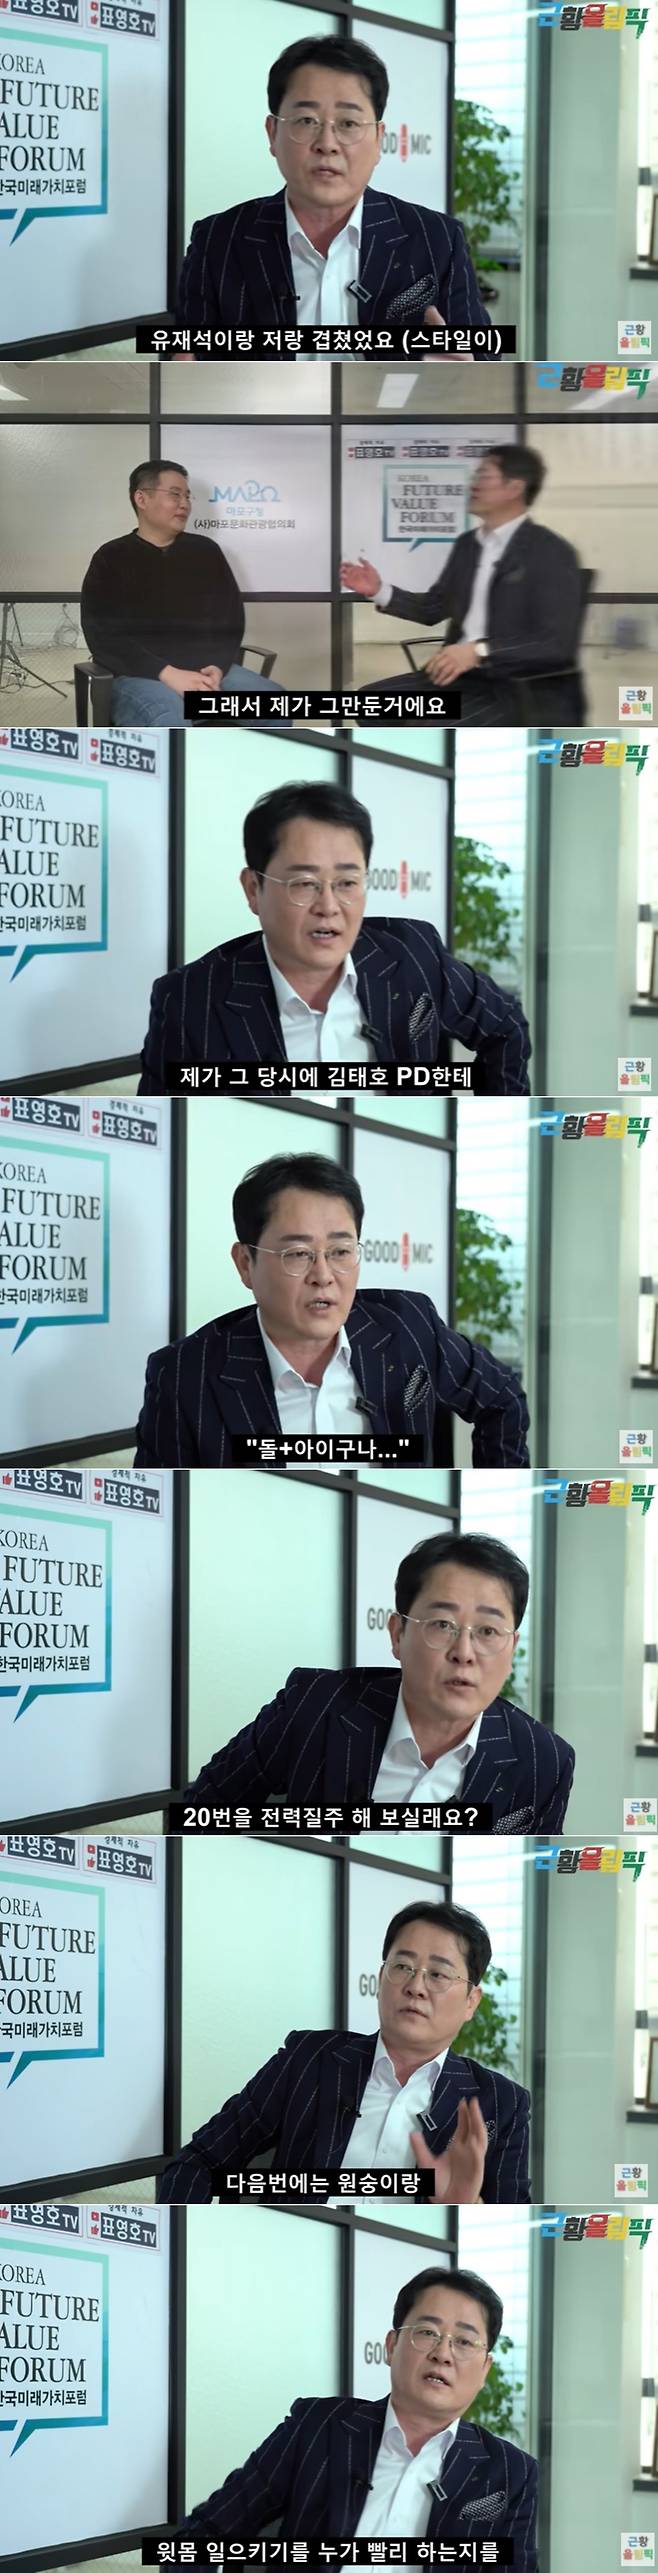 Seoul) = Pyo Young-ho, a comedian-turned-broadcaster, recalled the time of MBCs appearance on Infinite Challenge.On the 28th, YouTube channel Recent Olympics said, The broadcaster who came out only when TV was turned on.I met comedian and Pyo Young-ho who played a role in broadcasting as a close group member together with Yoo Jae-Suk, Park Soo-hong and Kim Yong-man.I have heard the story of leaving broadcasting during the popular activities such as Infinite Challenge as well as Nobrein Survival, and the recent situation of being a lecturer. Pyo Young-ho, who was an early member of Infinite Challenge, recalled the time and said, I went to the beginning and PD collected only strange children.Some of them are going to go ~ go ~ ~ ~ , and some of them are funny even if they roll a round of fat guy.Another guy was screaming at me while saying, Get me some.I had nothing to do with it, he said, Yoo Jae-Suk and I overlapped (style). Then who should stop. If the work of the company president and the manager overlaps, who should stop?I stopped because I stopped. Pyo Young-ho also recalled various impossible missions that he had at the Infinite Challenge.There was a mission to compare the speed of people pumping water in the bath and the speed of water draining naturally in the sewer.I recorded the mission from 6:00 a.m. to 11:00 p.m. and was taken to the hospital. I felt the limit of my fitness.I ran with the train. I ran over 20 times. Its hard twice. Next time Im going to do whoevers doing the monkey and sit-ups quickly.So I told Kim Tae-ho PD at the time, This is a turn.Pyo Young-ho said that the reason why he kept distance from broadcasting while doing vigorous activities was because he wanted to live a new life.I felt uneasy about my life, my worries, and my use, he said.However, he said, I started a business that was not broadcasting, and when I felt the burden of social life, I missed the days when I was broadcasting. I thought that it was the most comfortable at that time.Sometimes, I was hurt by my mind and body. I suffered from intermittent depression, mood failure.I had a lot of conversations with Yoo Jae-Suk, who came to my house at 9 am and went to 9 am the next morning.However, there is a loneliness that there is no one to talk to and there is no one to talk to. I have been doing business by creating a lecture education program for 10 years, said Pyo Young-ho, recalling Memory, who was impressed by the lecture.He also performed tour concerts. He is also serving as a volunteer to promote cultural tourism.Recently, I have created a meeting to communicate and study with mid-sized businessmen and opinion leaders. Finally, Pyo Young-ho, who has been on his 30th anniversary this year, said, I have lived only to achieve my goal, but now I think I will be happy.I hope you will live a happy life together. On the other hand, when the story of stock comes out in the entertainment industry, Pyo Young-ho, who is always mentioned, is a person who has tasted both failure and success with stocks.He made 1.5 billion won with 10 million won in seed money, but eventually lost all 1.5 billion won, which is often referred to as a failure of the representative stock of the entertainment industry.However, in an interview with March last year, he said, After two years of consultation after failing, I started stock again and left the stock market with 2.5 billion won in profits.He is currently a Kahaani content specialist who develops lecture culture, cultural contents, and Kahaani. He is giving lectures on communication and cooperation, inviting more than 200 companies and organizations annually.